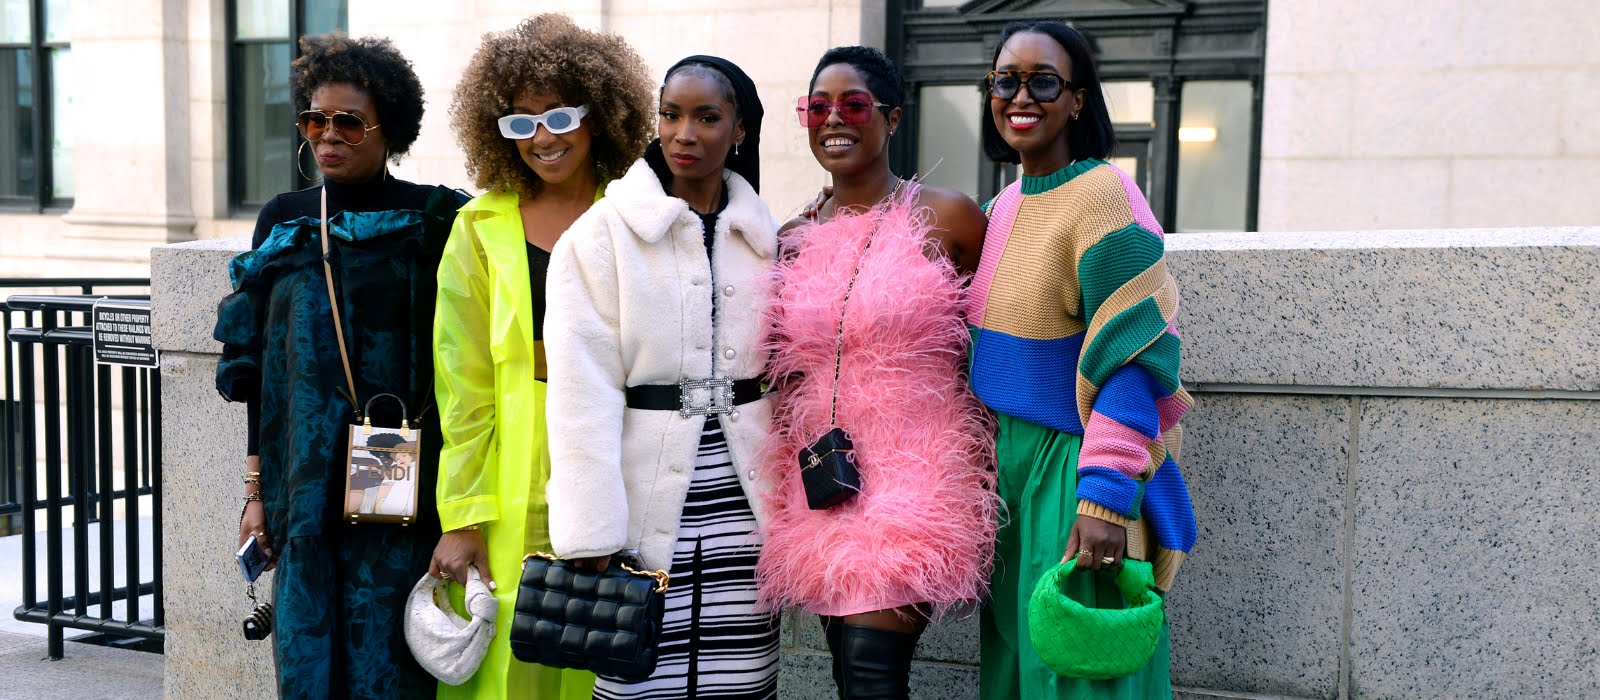 The best of New York Fashion Week street style to inspire your post-pandemic wardrobe